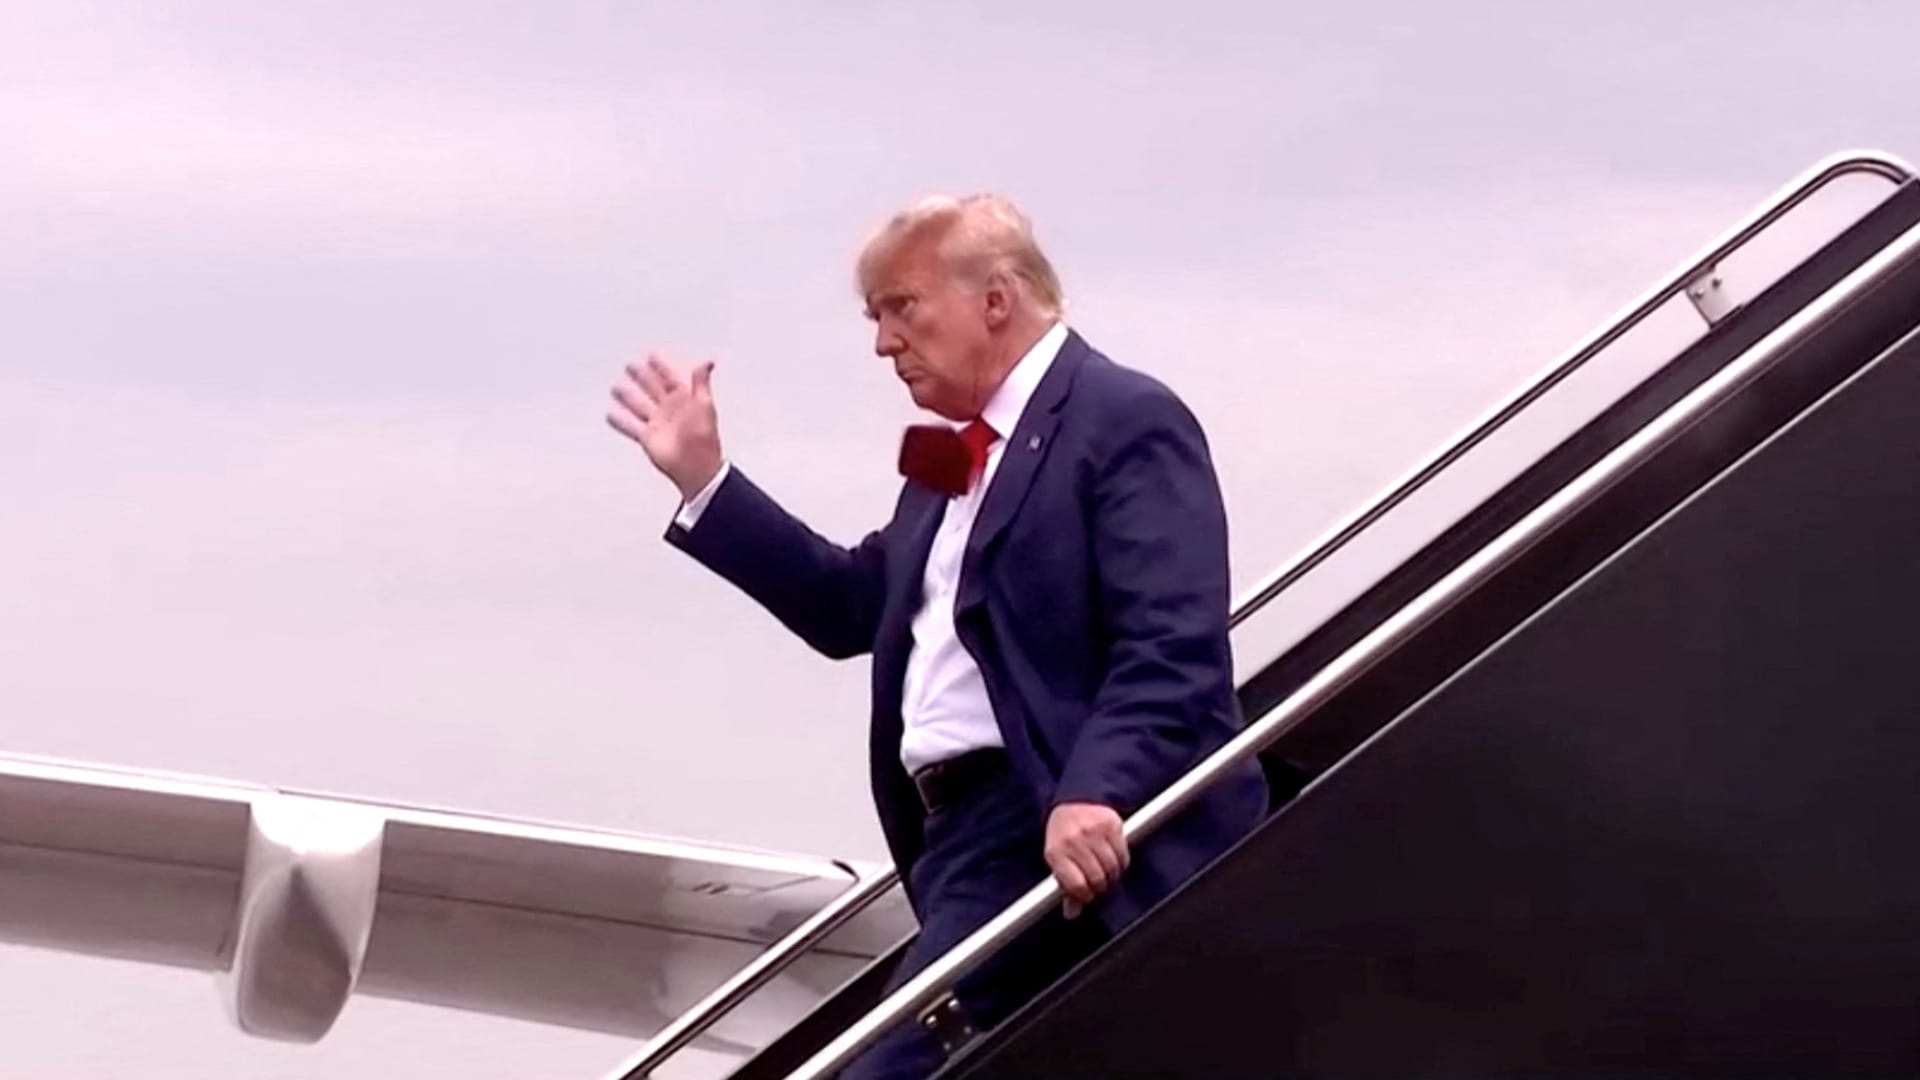 Former U.S. President Donald Trump, who is to appear in a federal court facing federal charges related to attempts to overturn his 2020 election defeat, waves as he arrives in this still image taken from video at Reagan Washington National Airport in nearby Arlington, Virginia, U.S., August 3, 2023. 